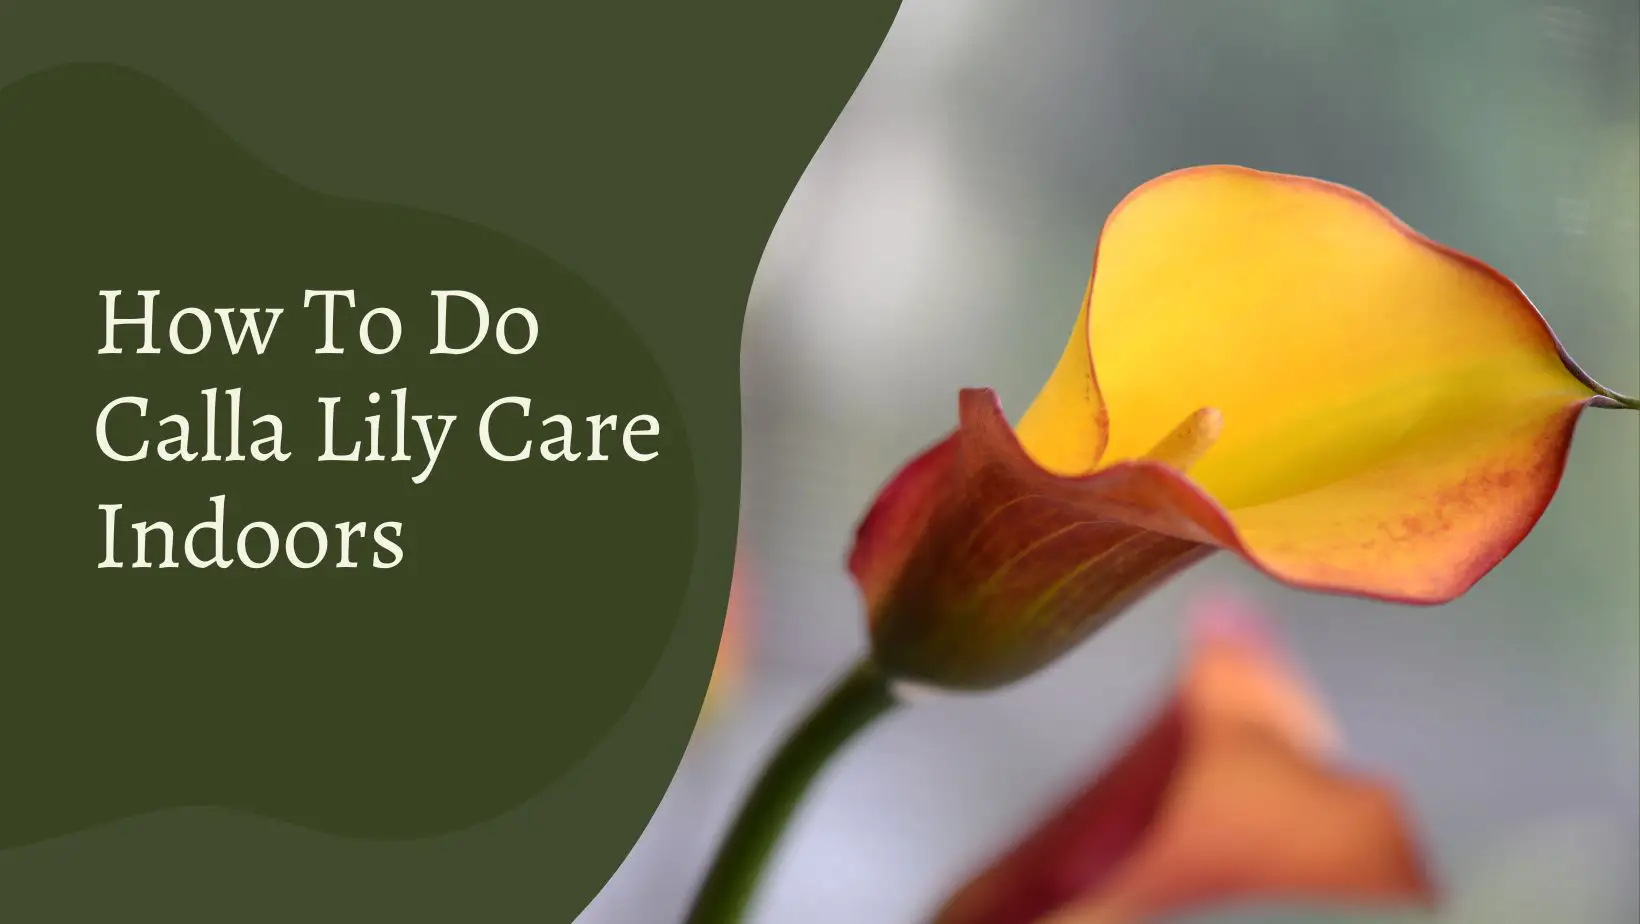 How To Do Calla Lily Care Indoors